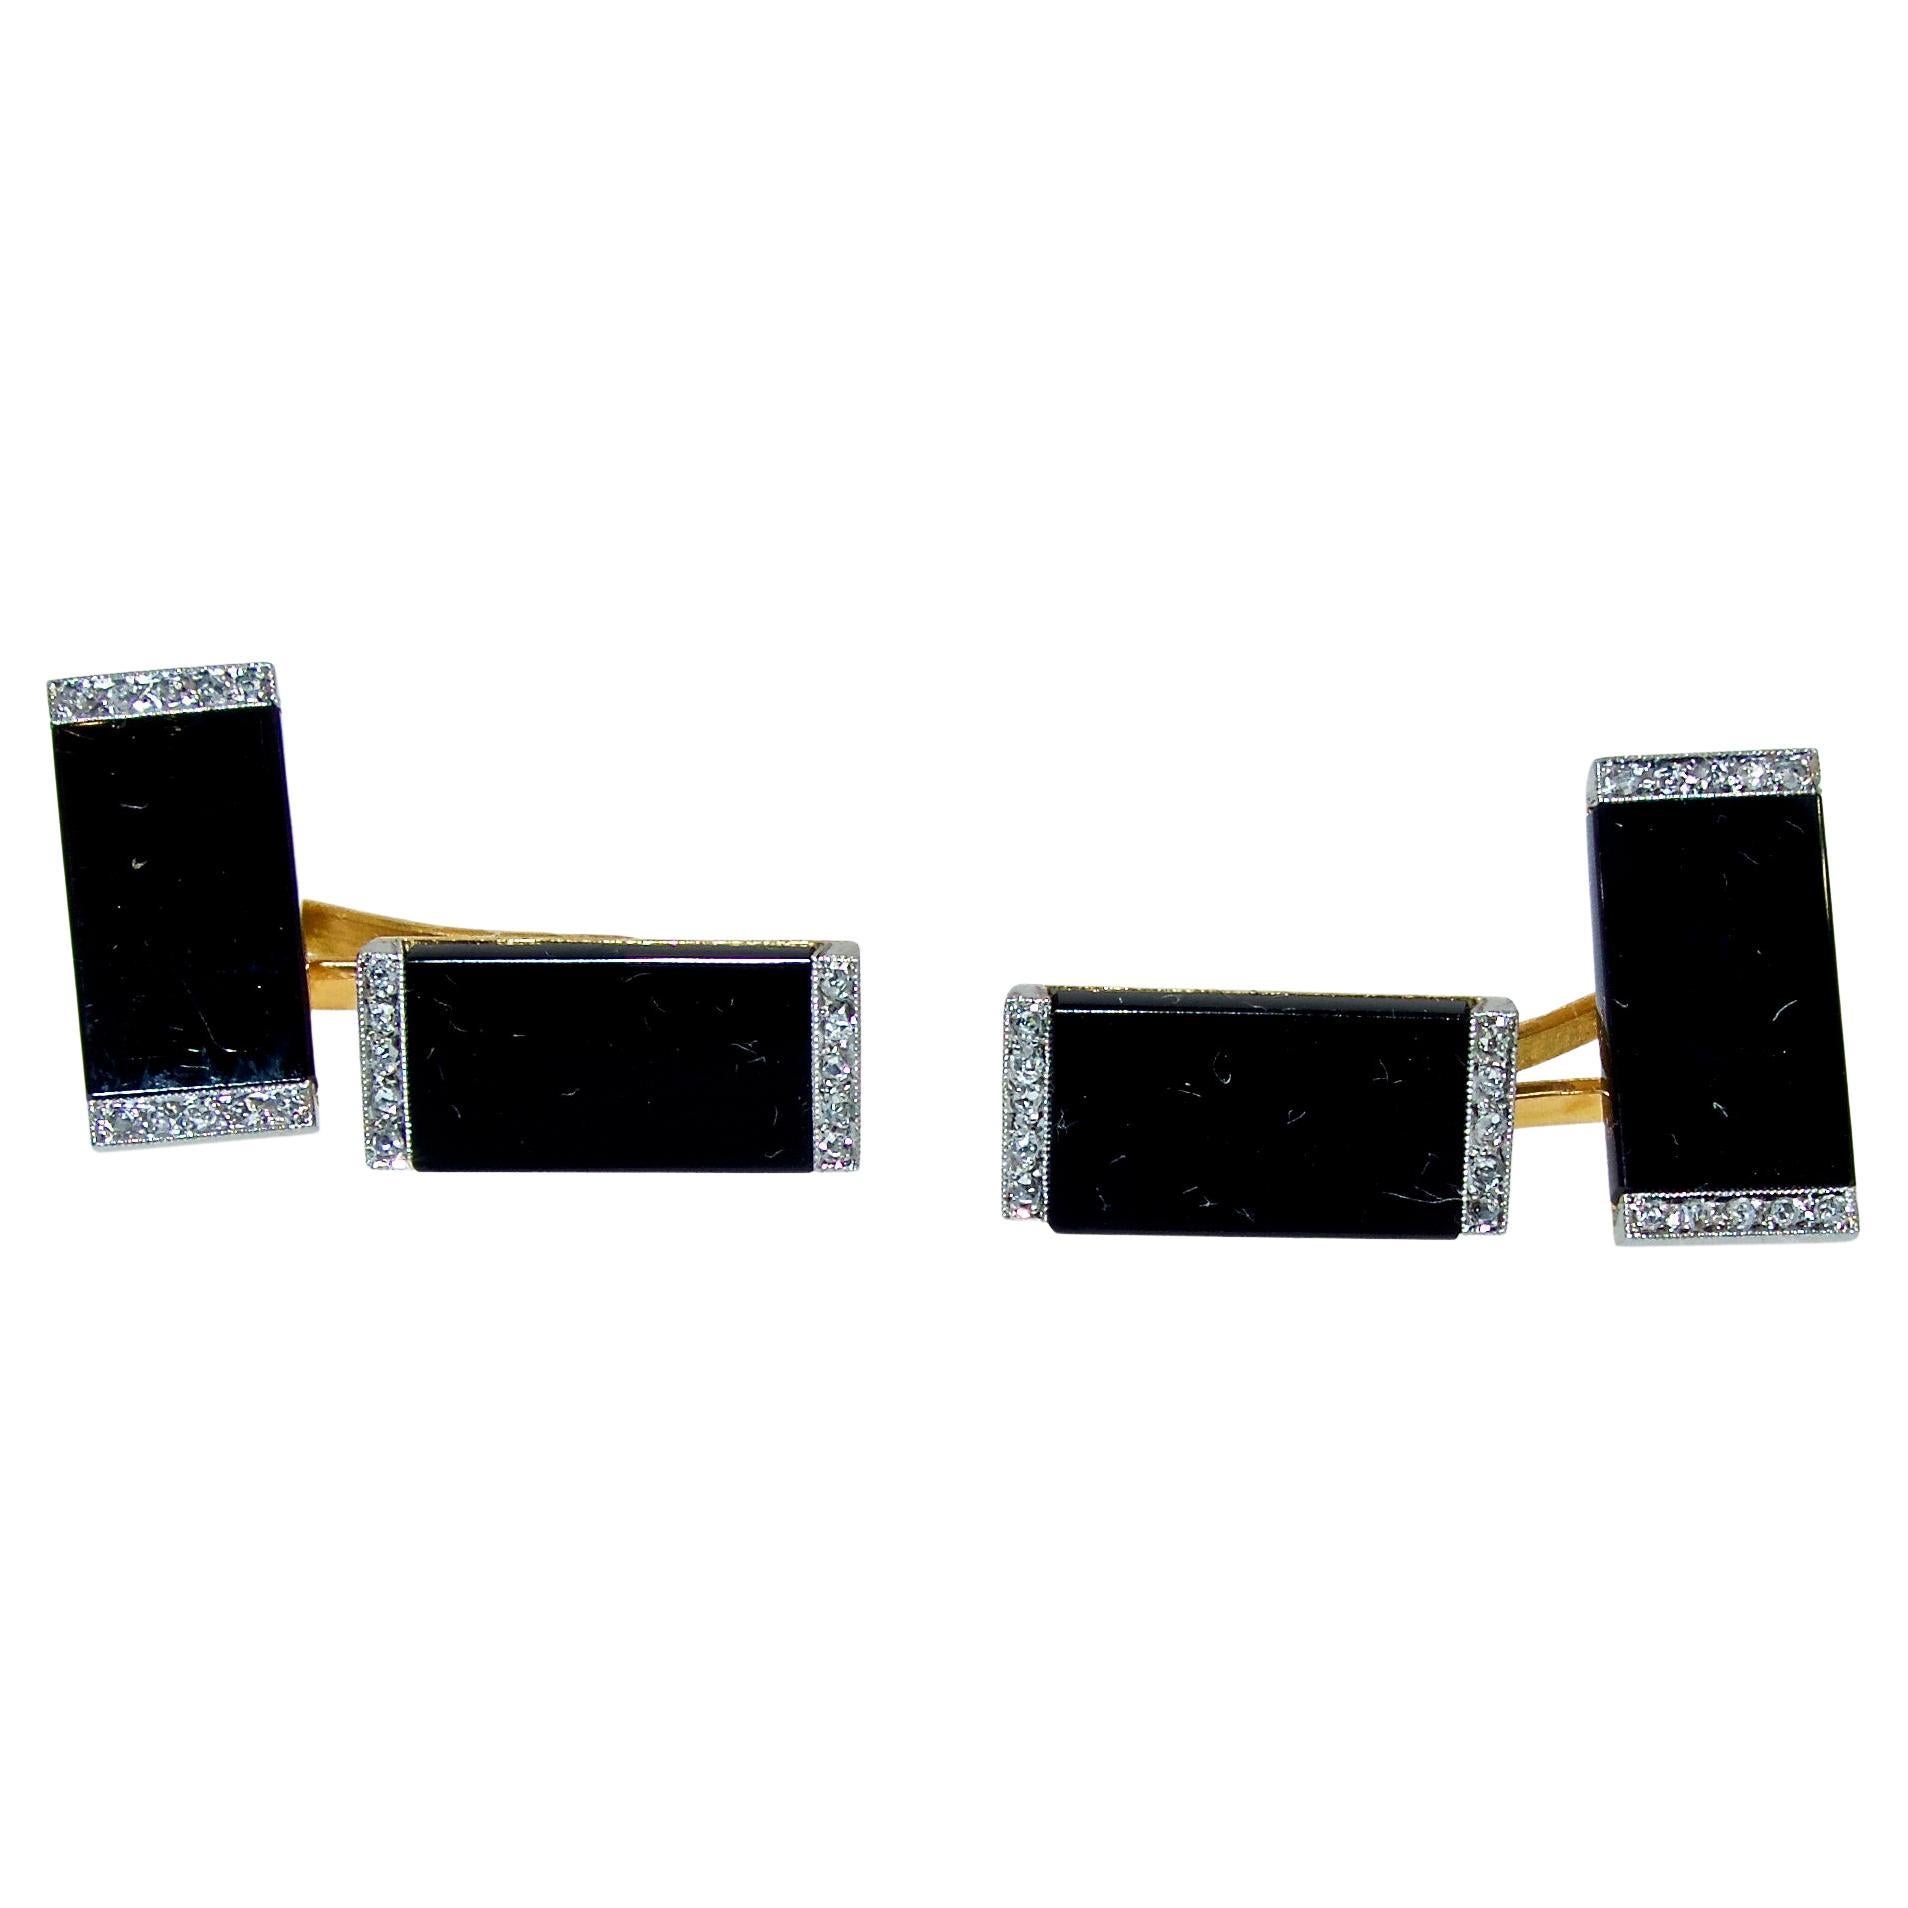 Art Deco back to back cufflinks.  Ghiso, the famous French house made these back to back 18K cufflinks, circa 1925.  Onyx panels are bordered with 30 rose cut diamonds set in platinum.  Well made, (this type of linked center is a favorite as they